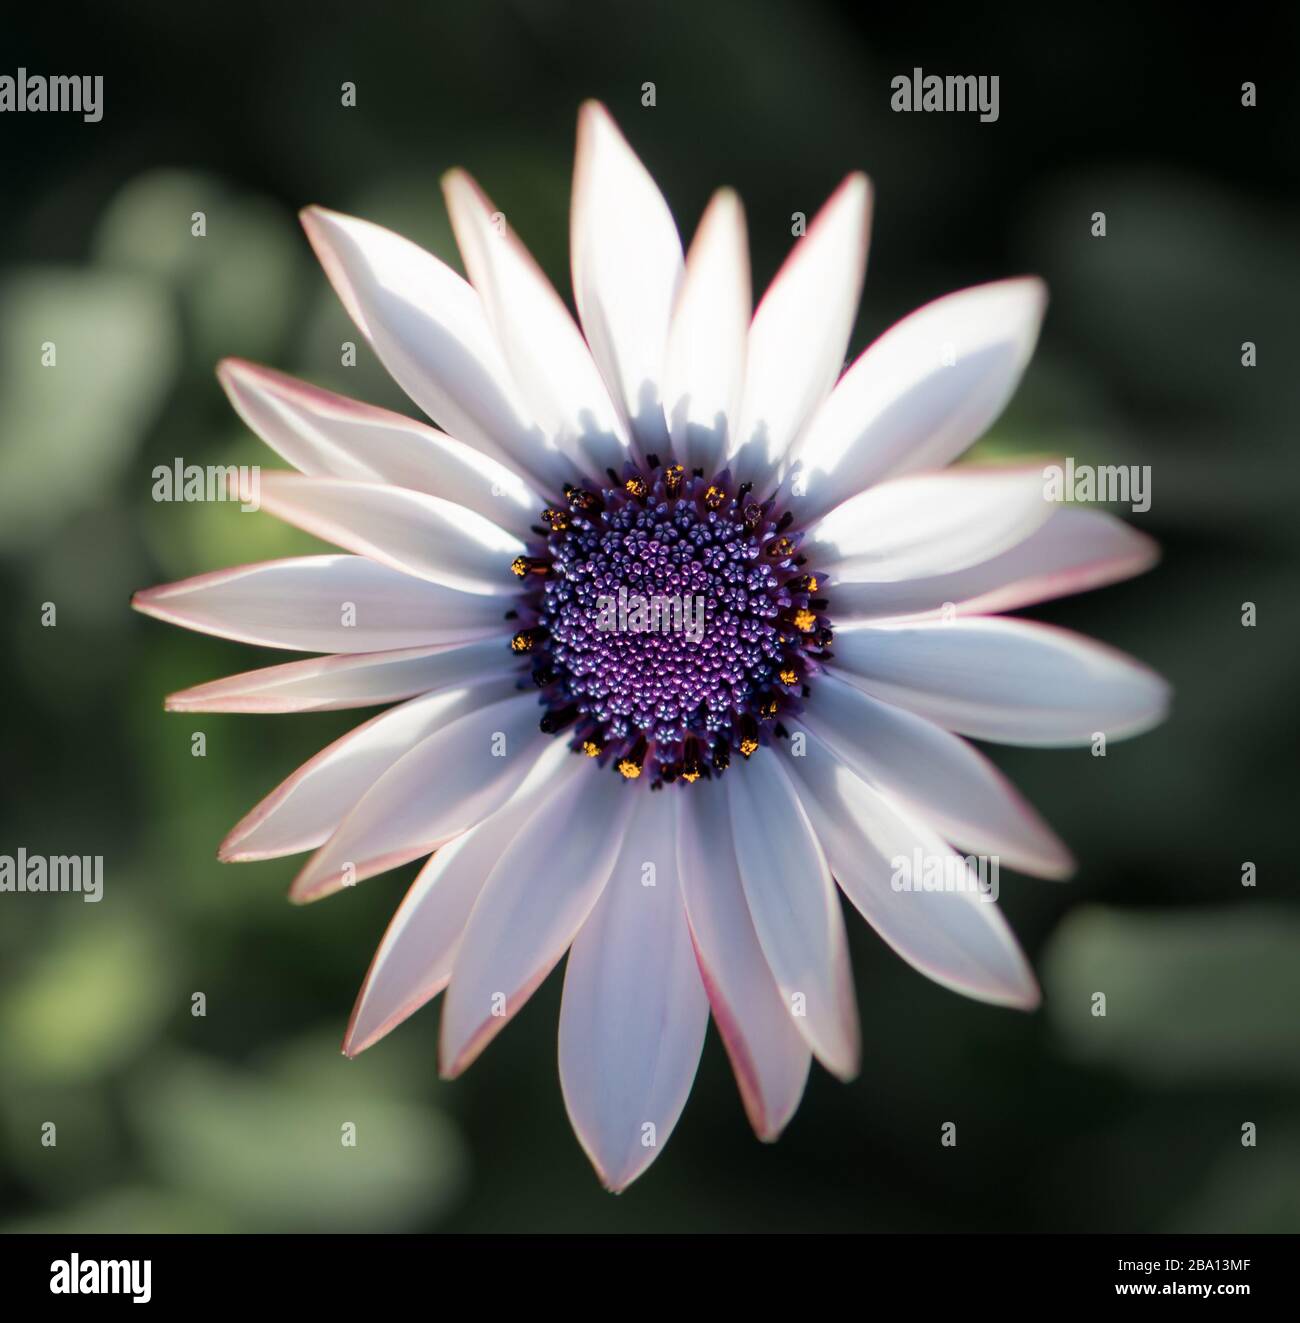 White daisy with purple middle. Close up. Osteospermum fruticosum. White flower with green blurry background Stock Photo